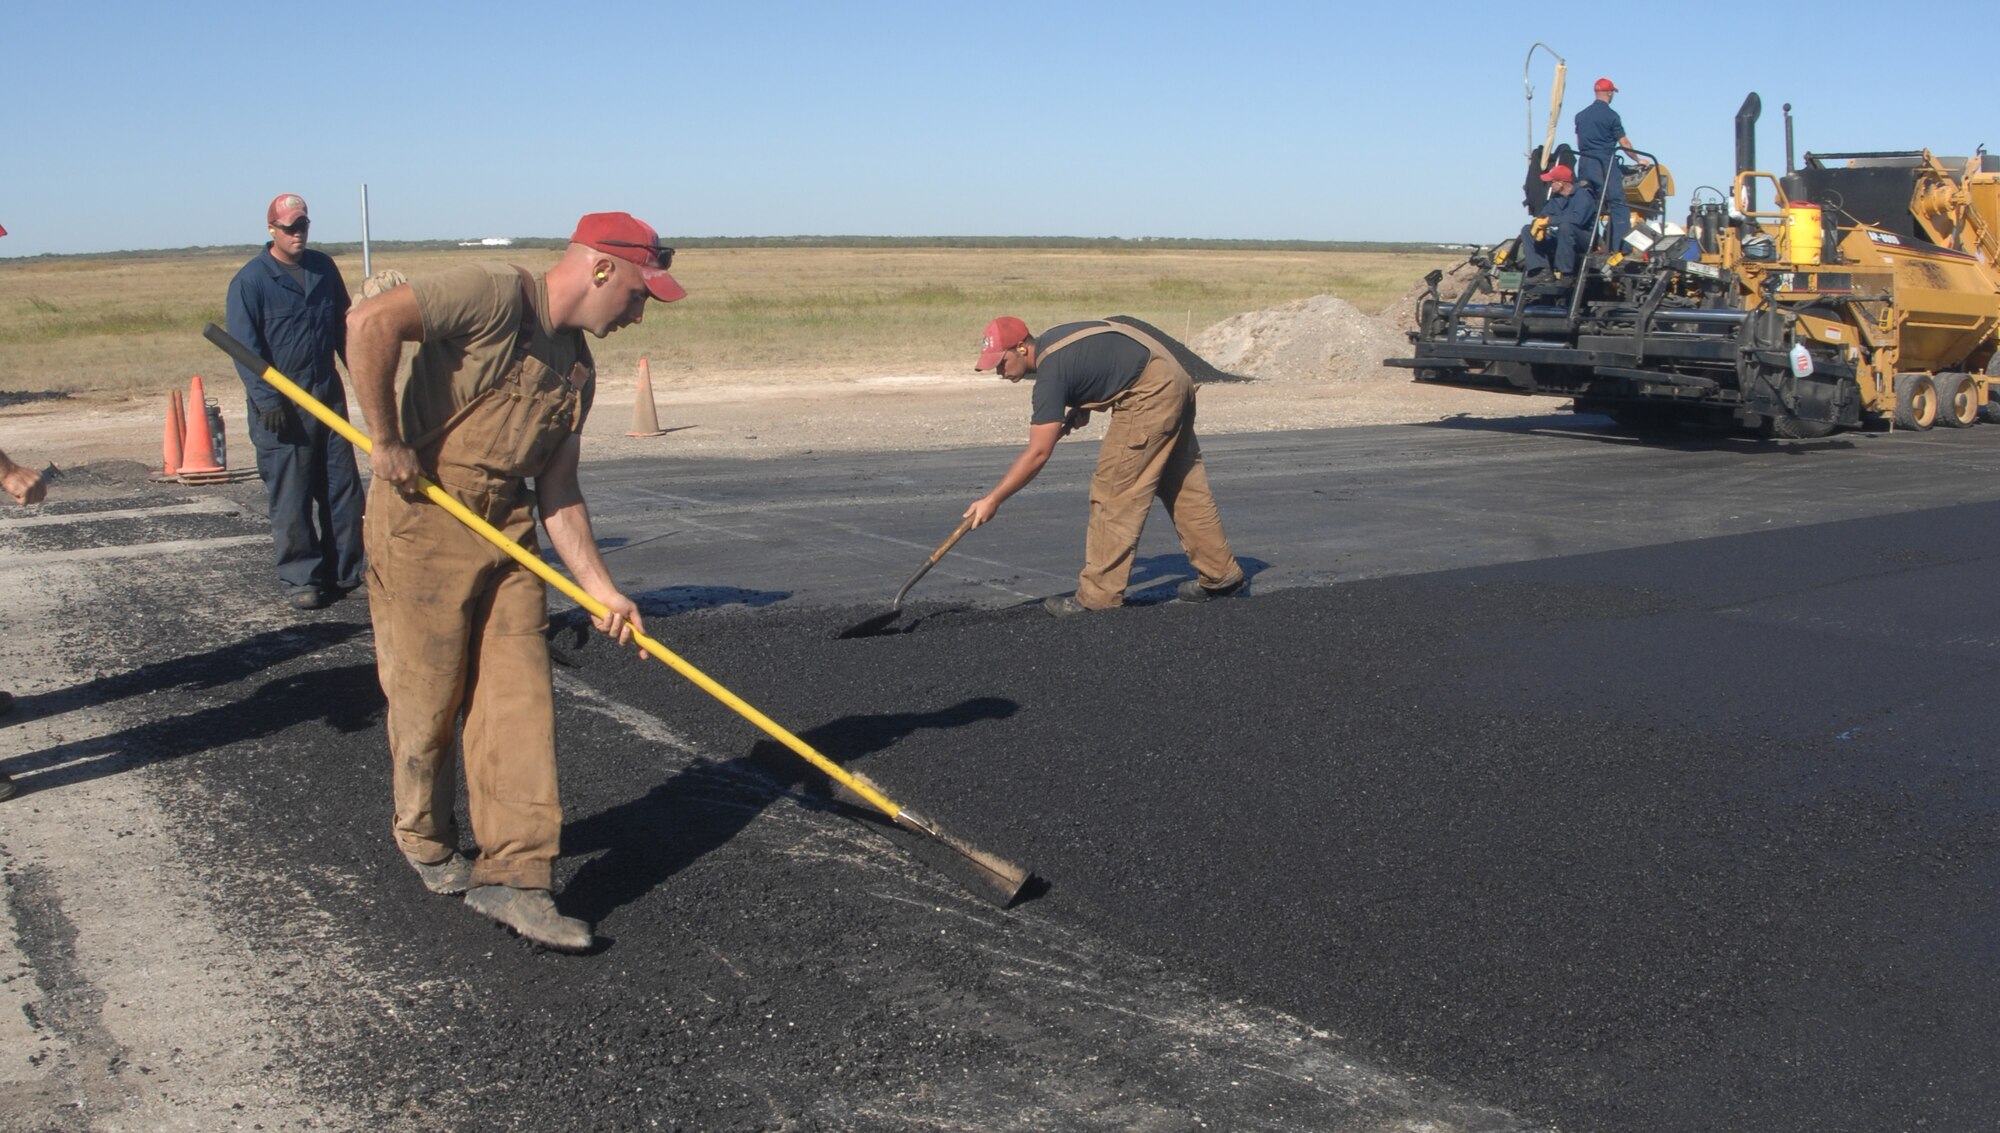 REDHORSE team members repave Dyess' runway Oct. 18 while the base B-1s are deployed. The work REDHORSE does here and around the Air Force trains them to deploy in support of the Global War on Terror. (U.S. Air Force photo by Airman 1st Class Felicia Juenke)